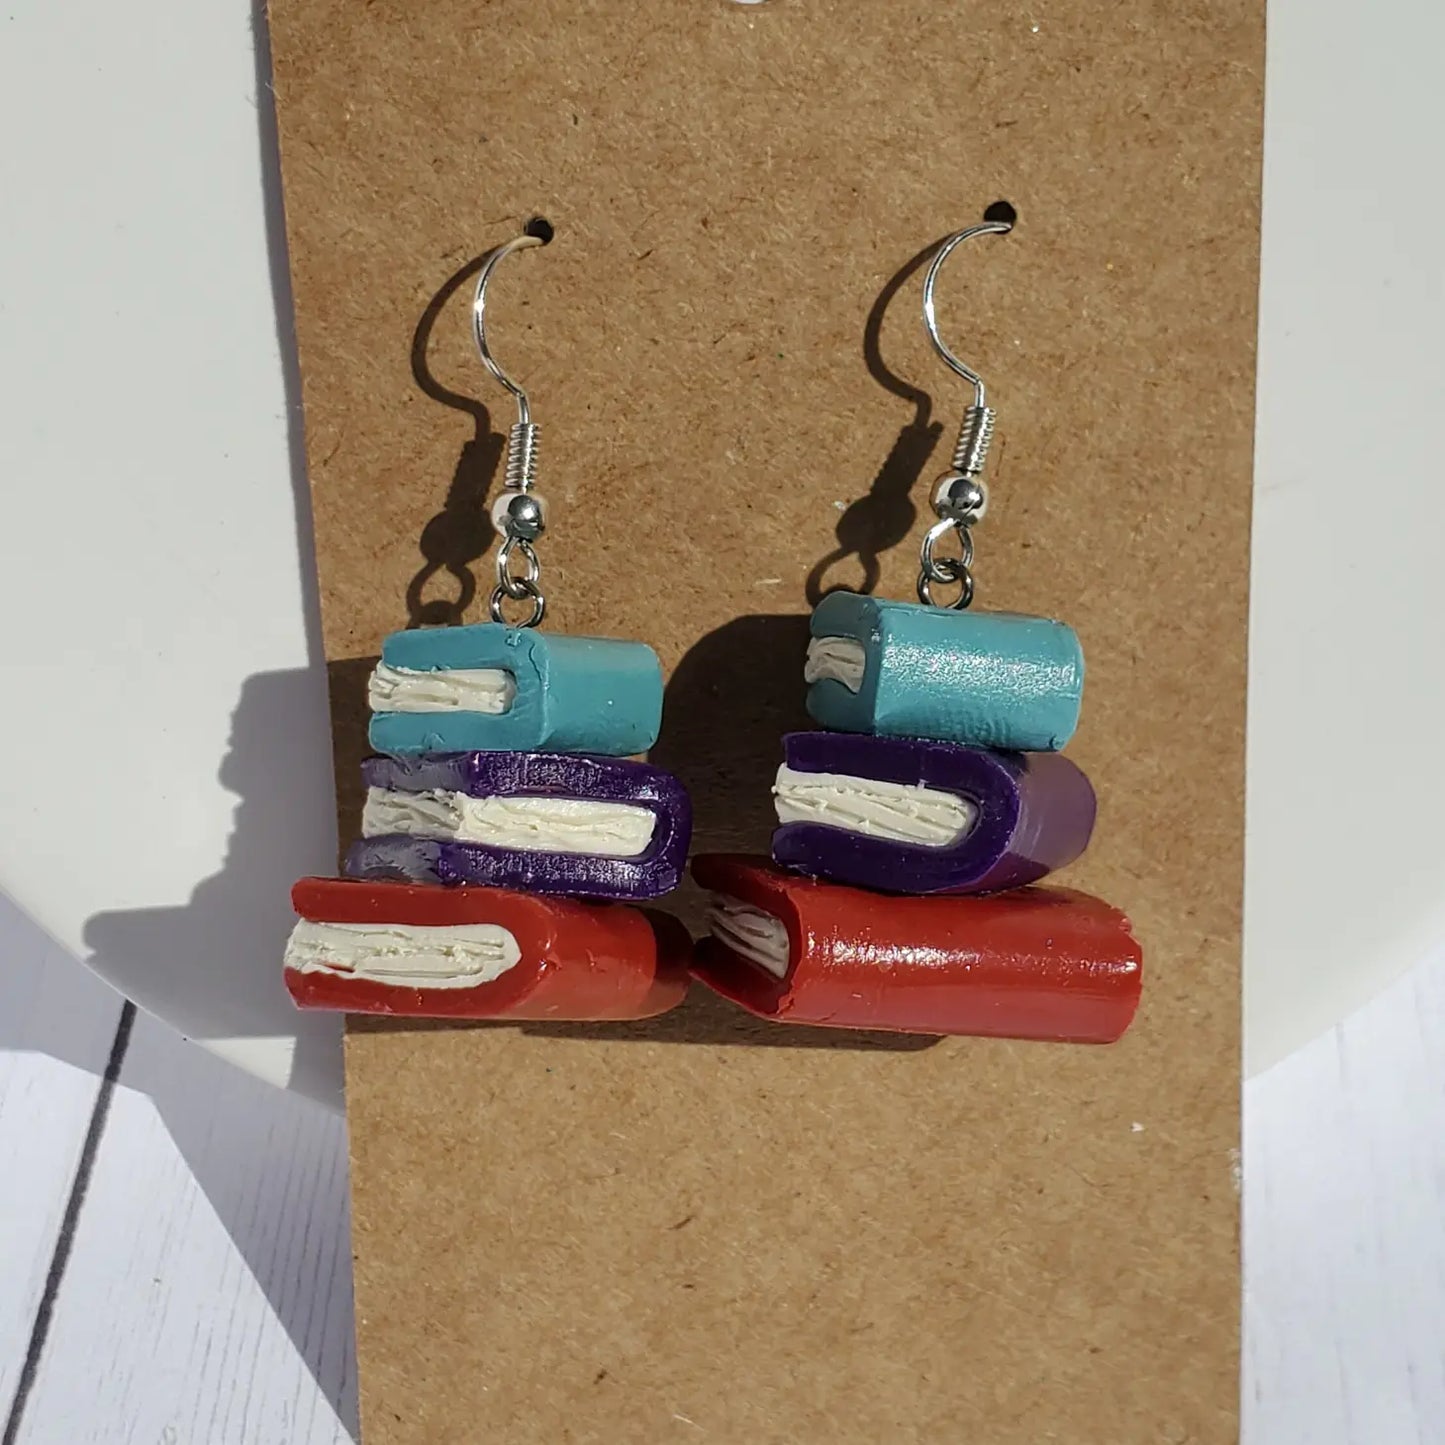 A pair of small, clay earrings in the shape of a stack of books hanging from a cardboard sheet, against a wooden table. The earrings are on a set of silver earring hooks. 